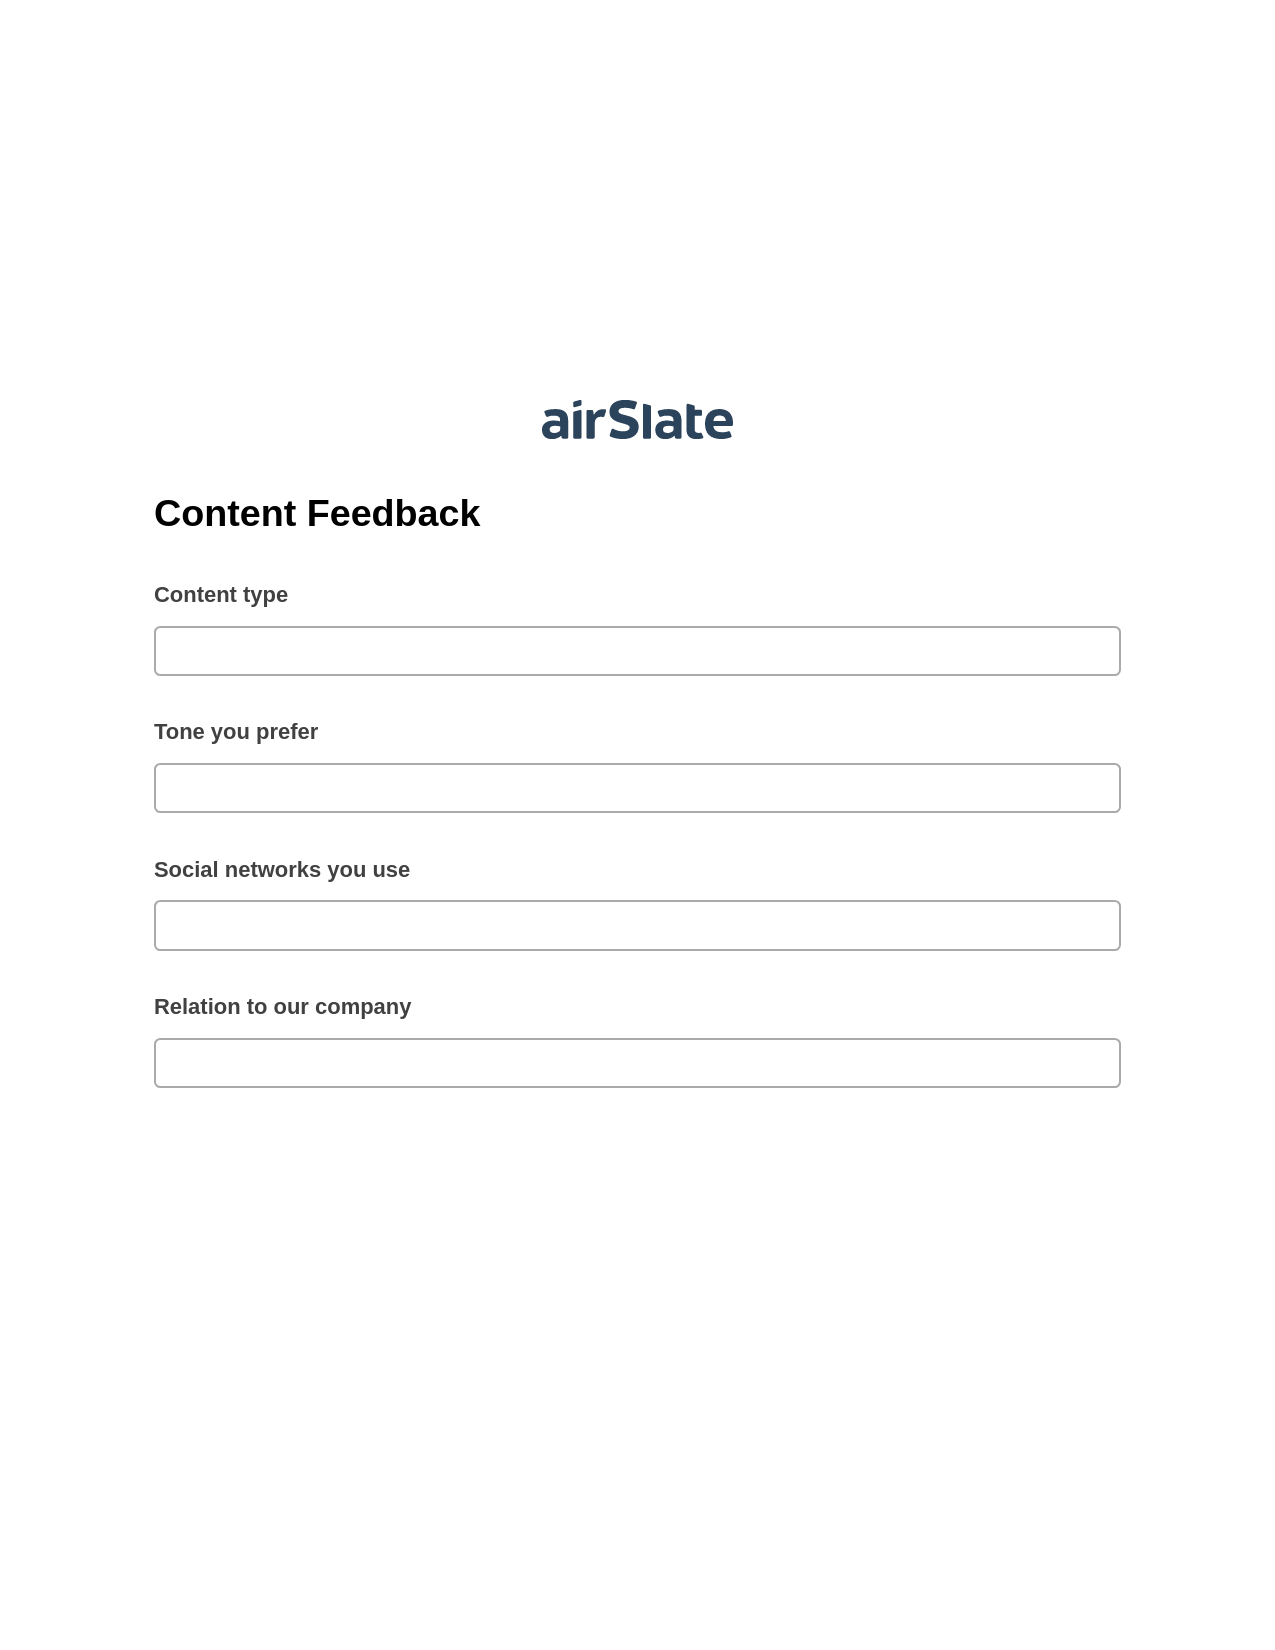 Multirole Content Feedback Pre-fill from Salesforce Record Bot, System Bot - Create a Slate in another Flow, OneDrive Bot